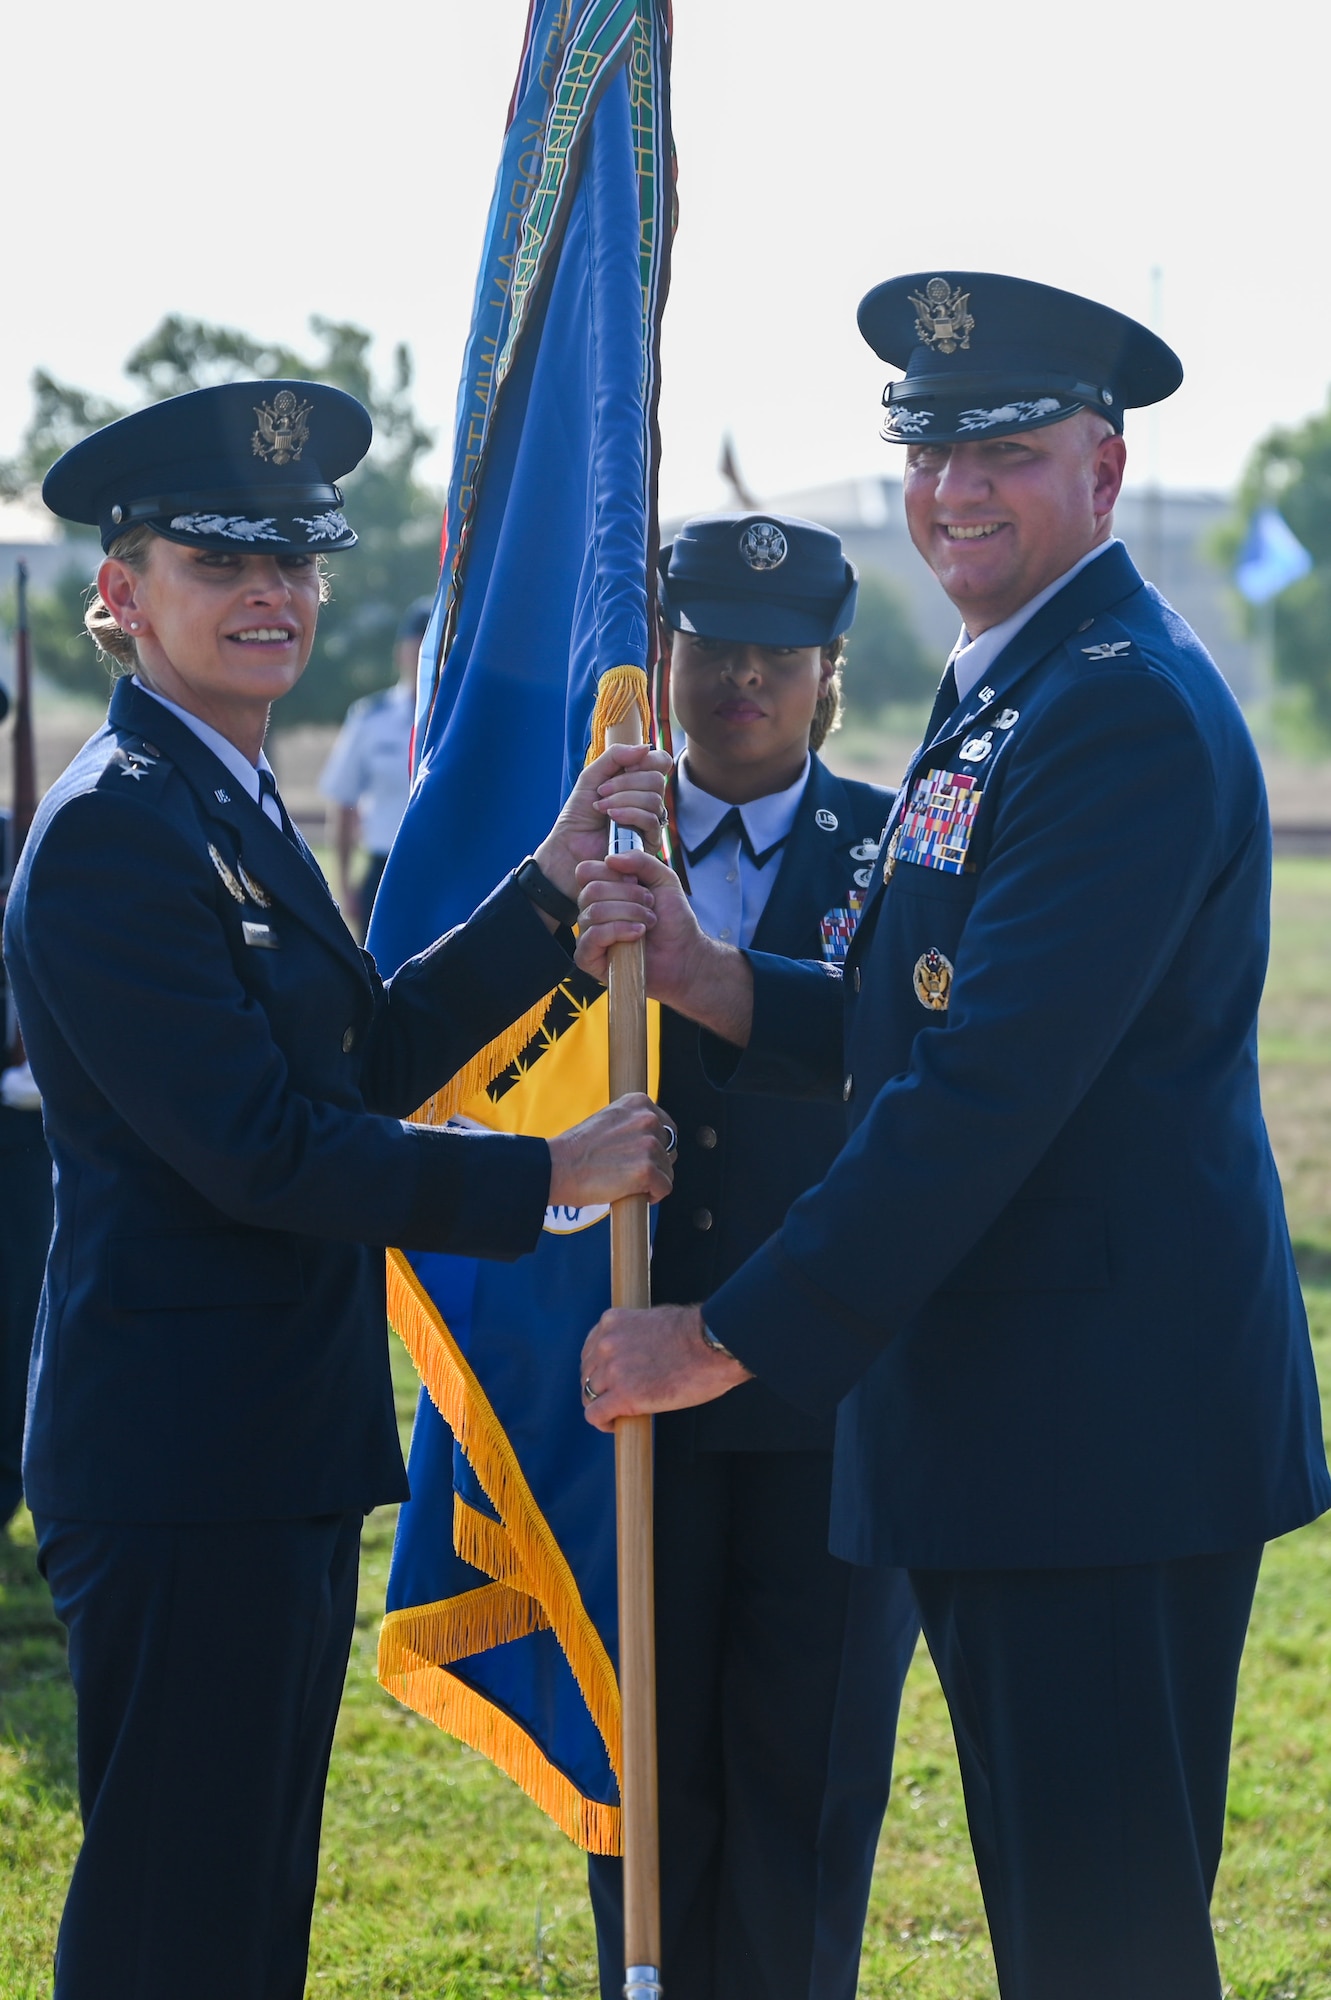 U.S. Air Force Col. Matthew Reilman, outgoing 17th Training Wing commander, passes the guidon to Maj. Gen. Michele Edmondson, 2nd Air Force commander, relinquishing command during the change of command ceremony at Goodfellow Air Force Base, Texas, June 16, 2023. Passing the guidon represents the transfer of leadership responsibilities to the next commander. (U.S. Air Force photo by Senior Airman Sarah Williams)